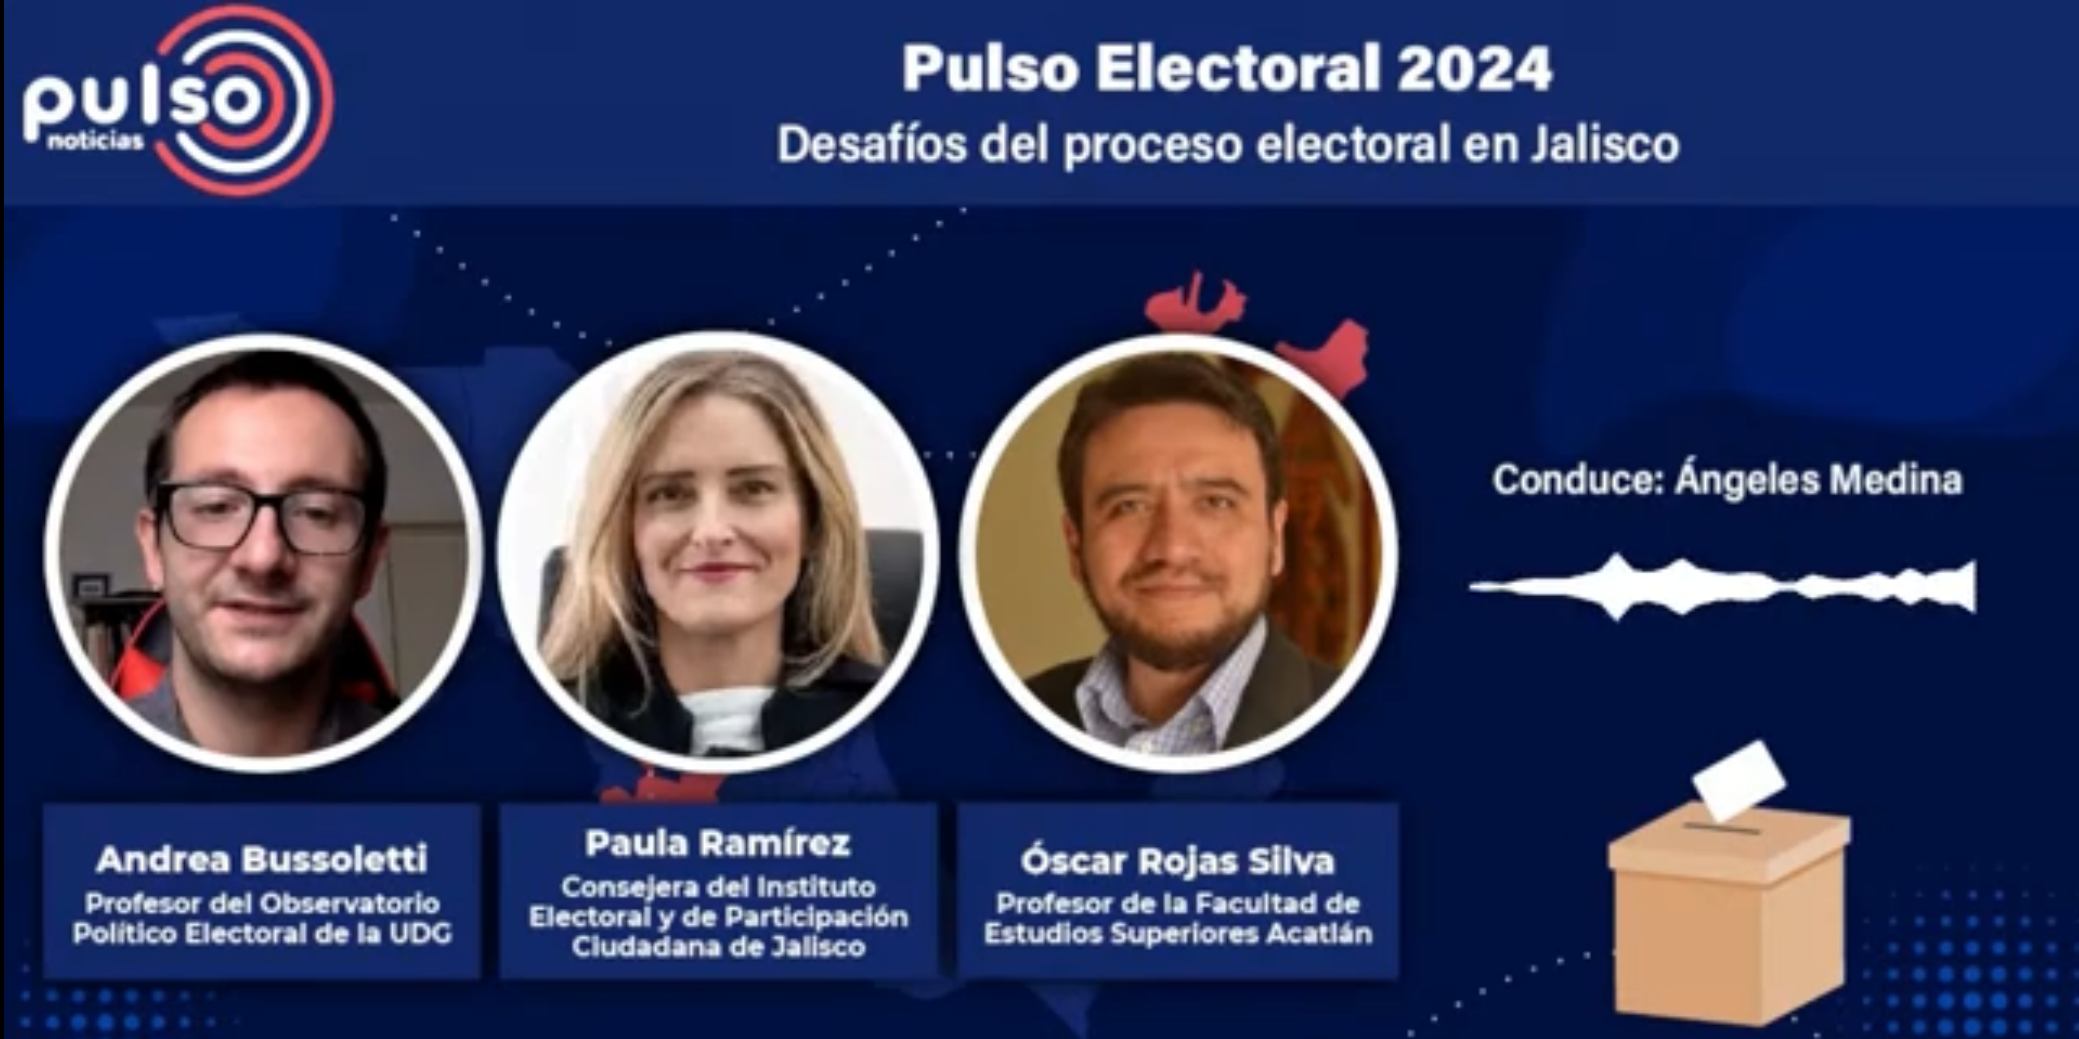 Pulso Electoral 2024: Electoral Process Challenges in Jalisco